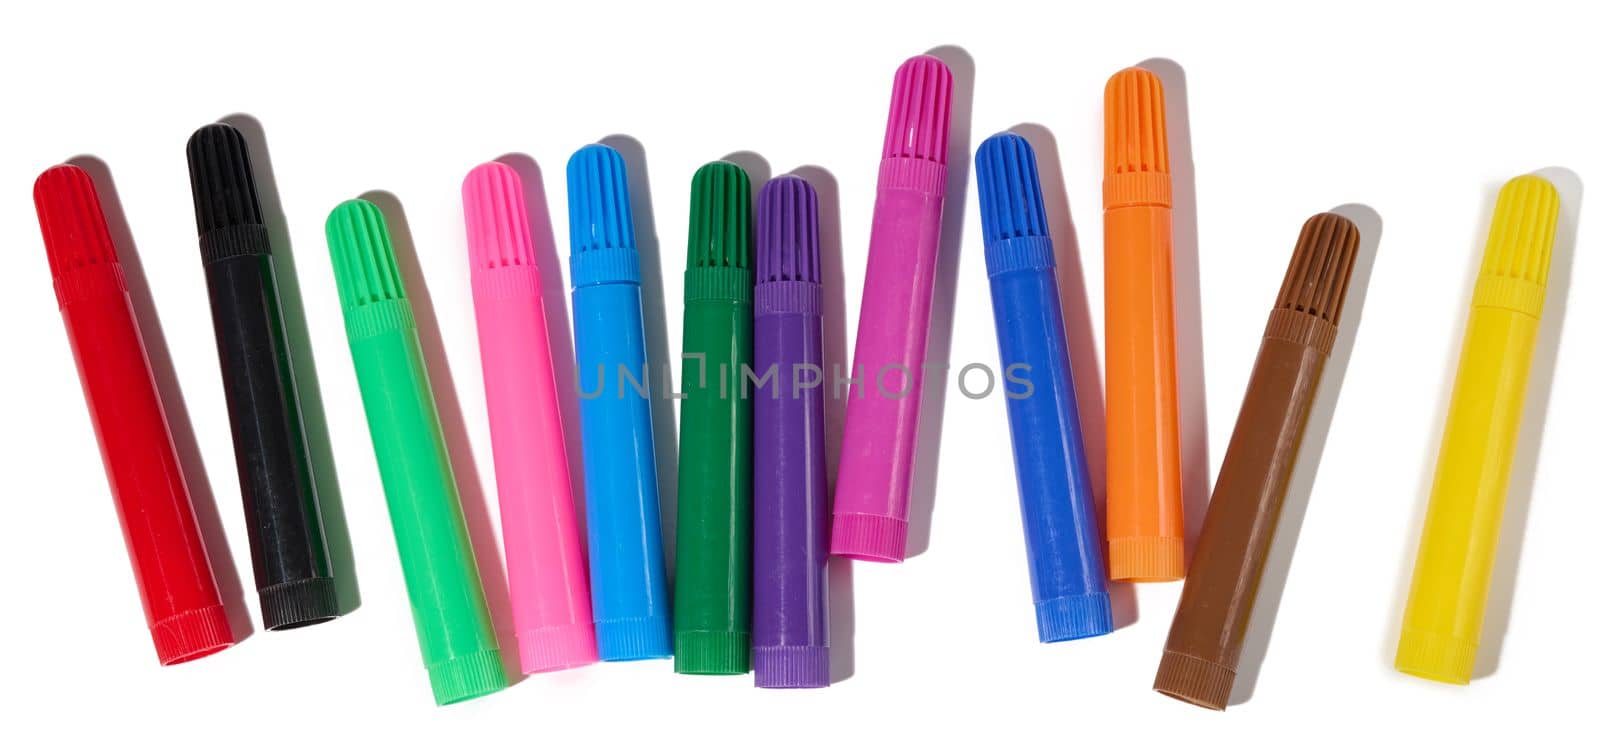 Stack of multicolored felt-tip pens isolated on white background, top view